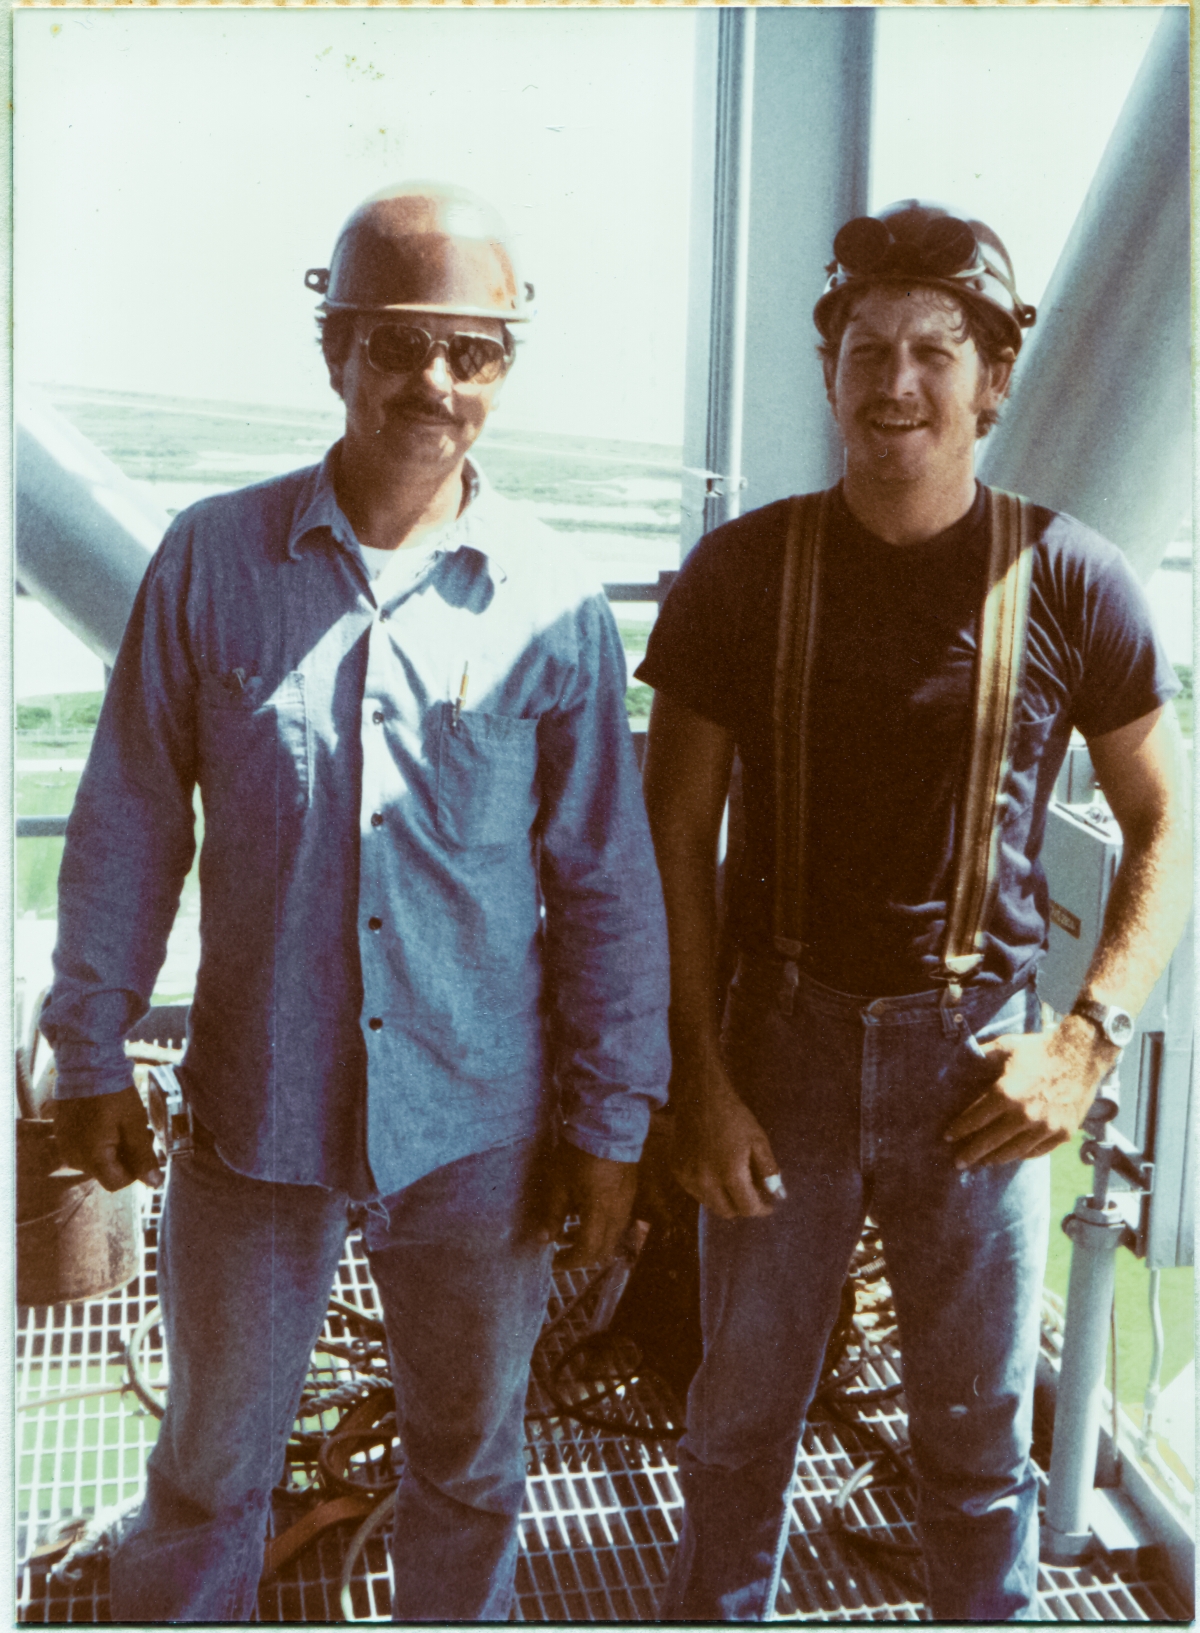 Image 064. Union Ironworkers from Local 808, working for Ivey Steel at Space Shuttle Launch Complex 39-B, Kennedy Space Center, Florida, Gene Lockamy and, alas, unknown name but another Good Man nonetheless, stand upon wide-open steel-bar grating, through which the green hue of the grass far beneath them can clearly be seen, momentarily humor the photographer who wanted to take their picture, and take a brief time-out from their work on the Fixed Service Structure high above the wilderness of the Merritt Island Wildlife Refuge and shoreline of the Atlantic Ocean, visible in the distance behind them to the north. The grating upon which they stand, and the heavy structural steel behind them which holds it up, was once a part of Apollo Program Mobile Launcher 2, which serviced the Saturn V launches of Apollos 6, 9, 12, 14, and also Skylab. After the end of the Apollo and Skylab Programs, the Launch Umbilical Tower was removed piecewise in sections from the Mobile Launcher “box” it stood on top of, and was then reassembled by Wilhoit Steel Erectors on Pad B to become the Fixed Service Structure you see a very small part of in this photograph. Photograph by James MacLaren.